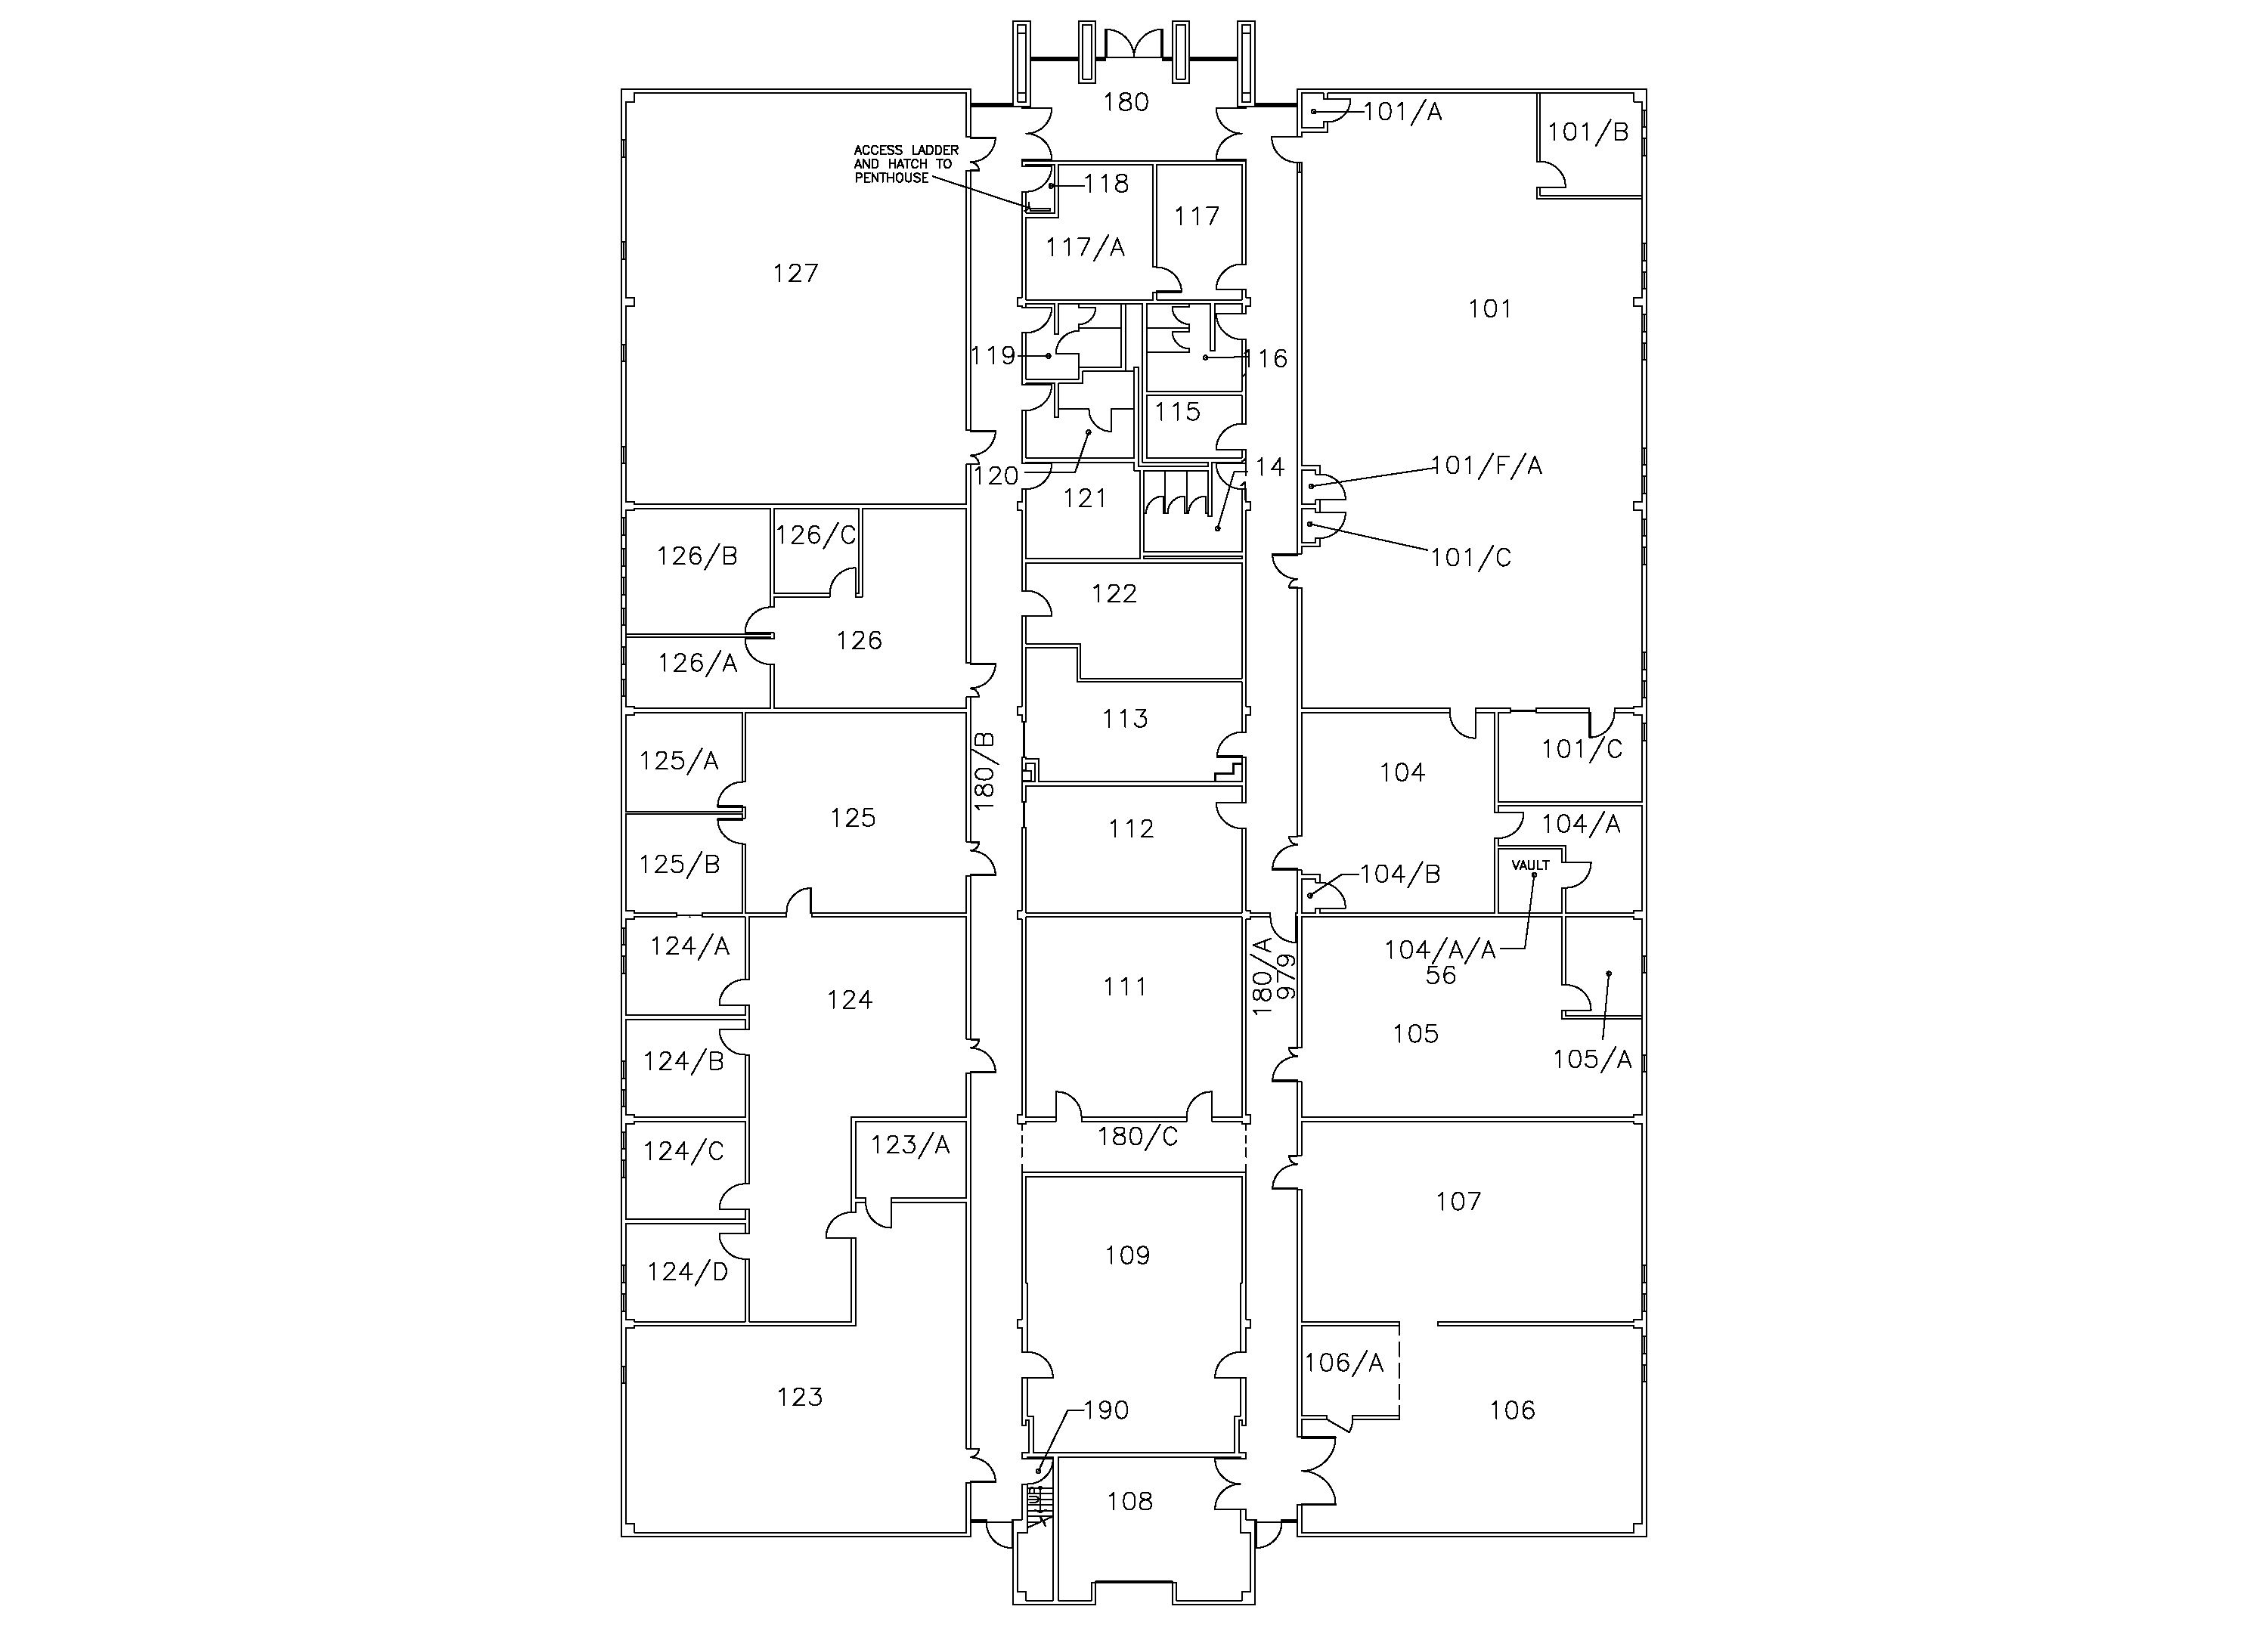 Mcmaster University T13 First Floor Map 